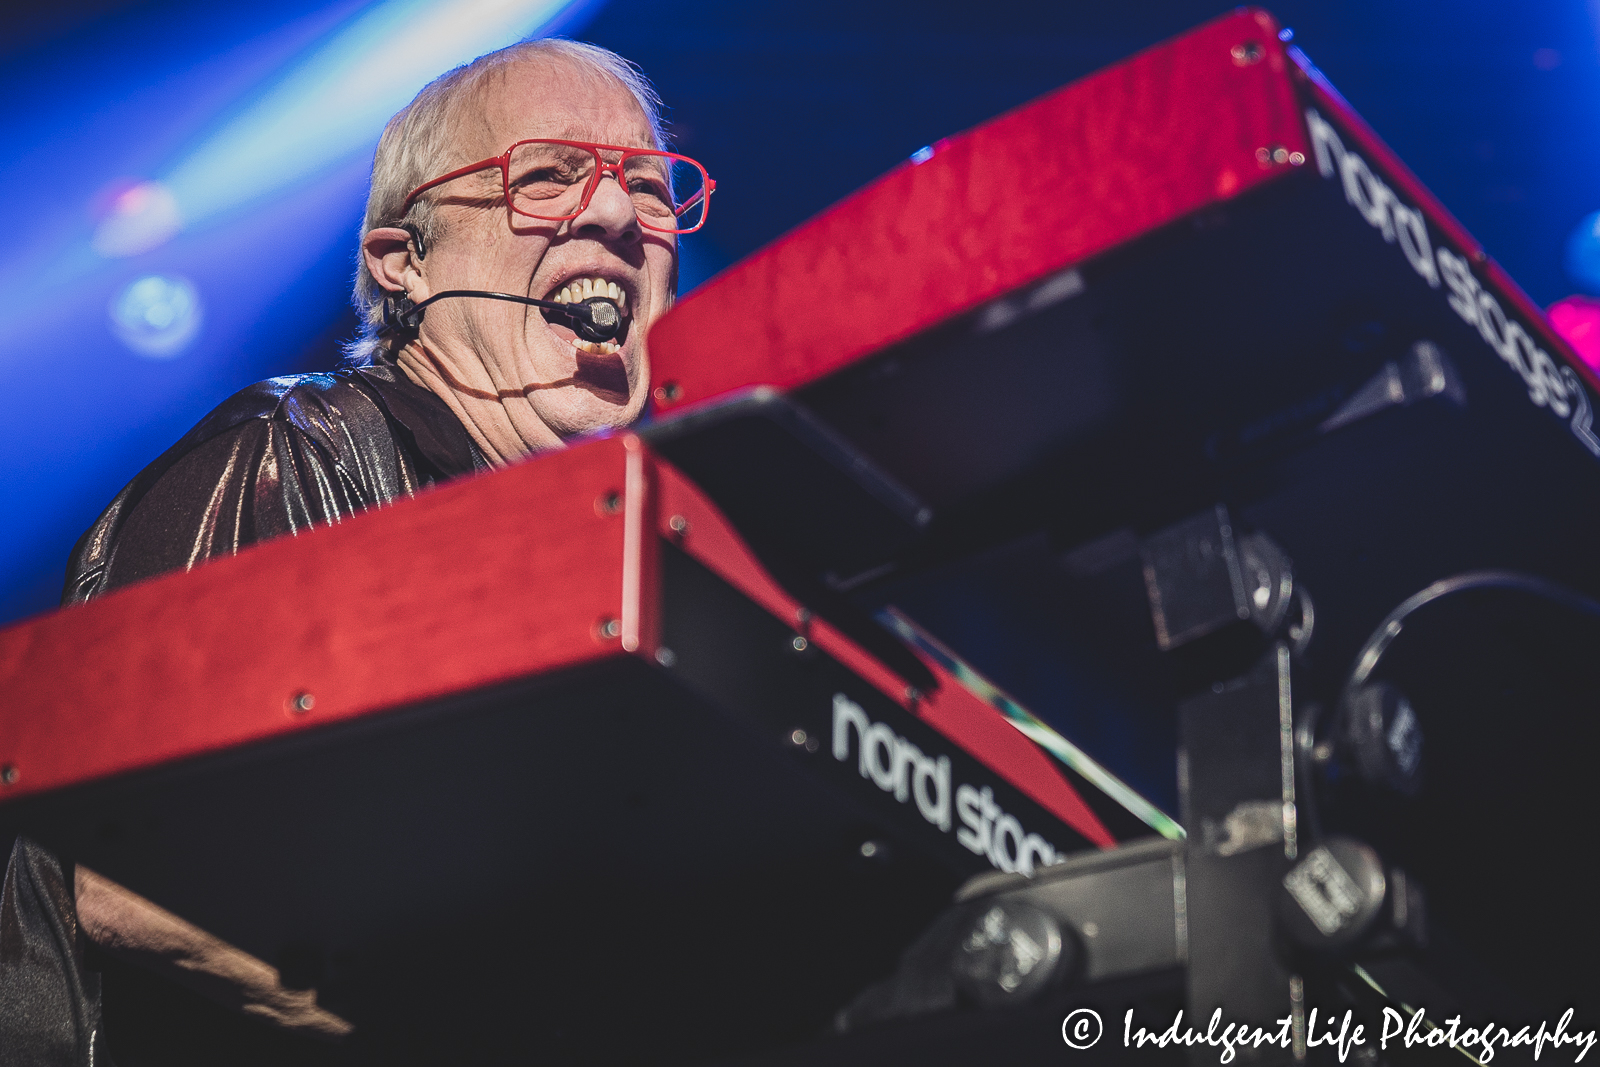 Shooting Star keyboardist Dennis Laffoon live in concert at Star Pavilion inside of Ameristar Casino in Kansas City, MO on April 9, 2022.